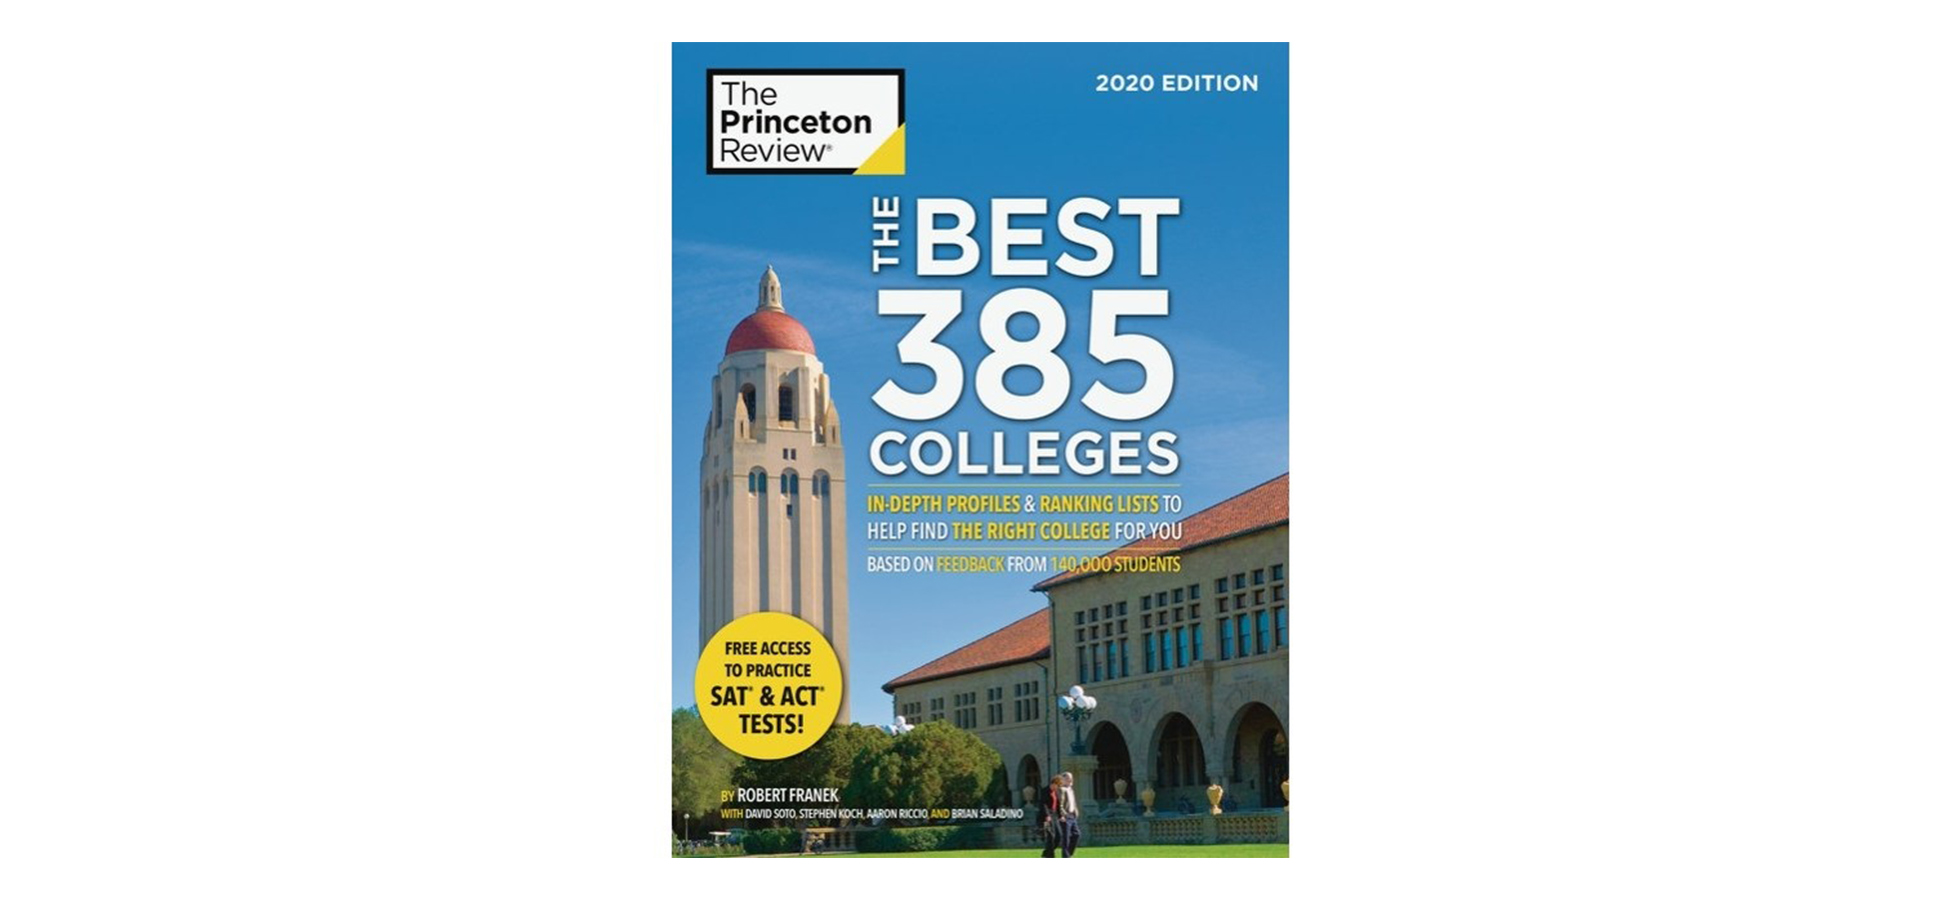 Best College Princeton Review